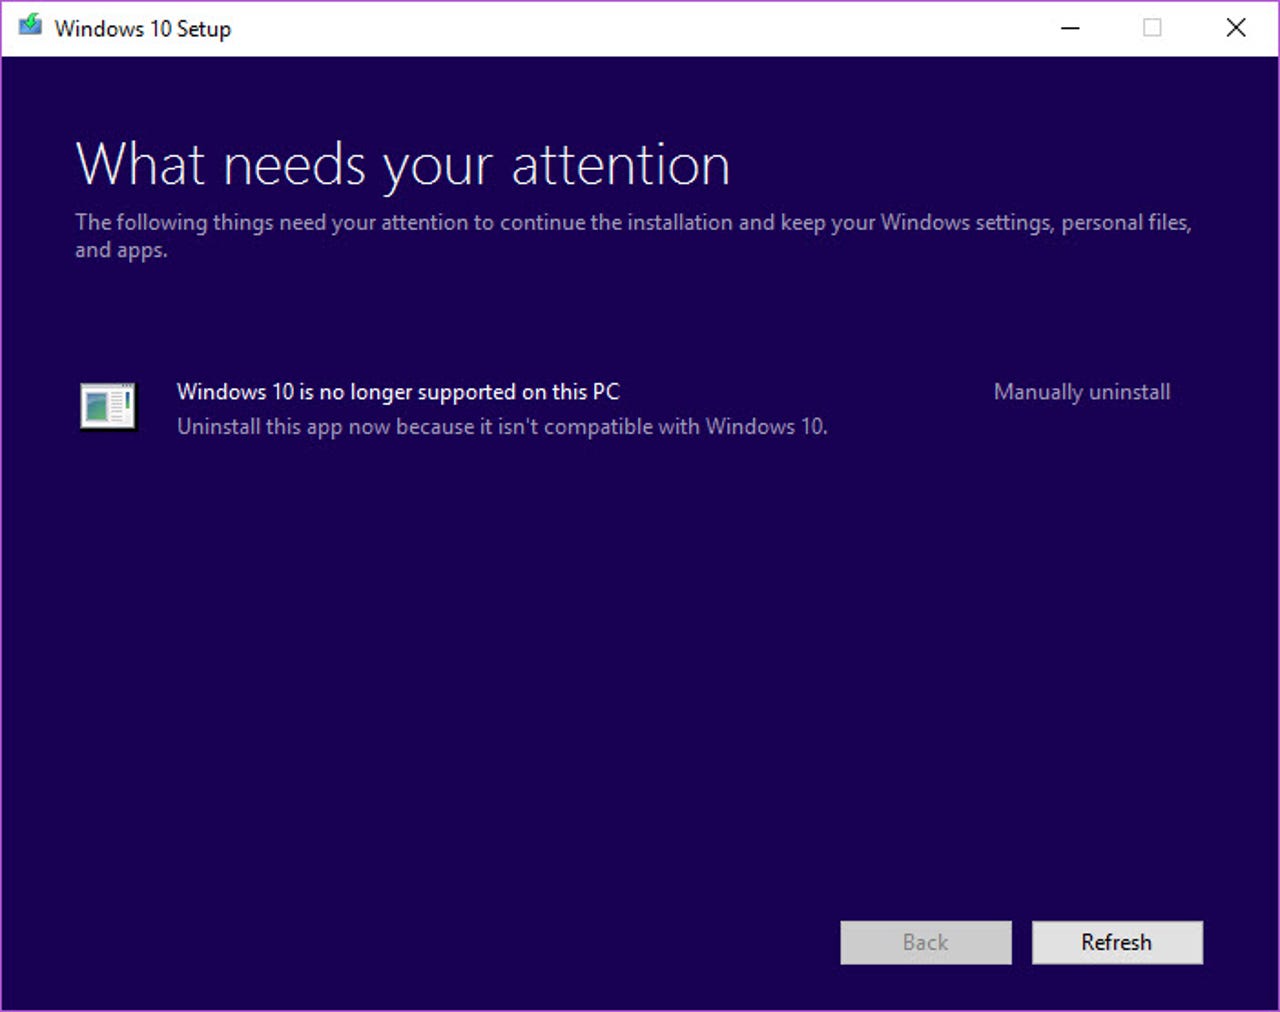 Windows 10 is no longer supported - error message